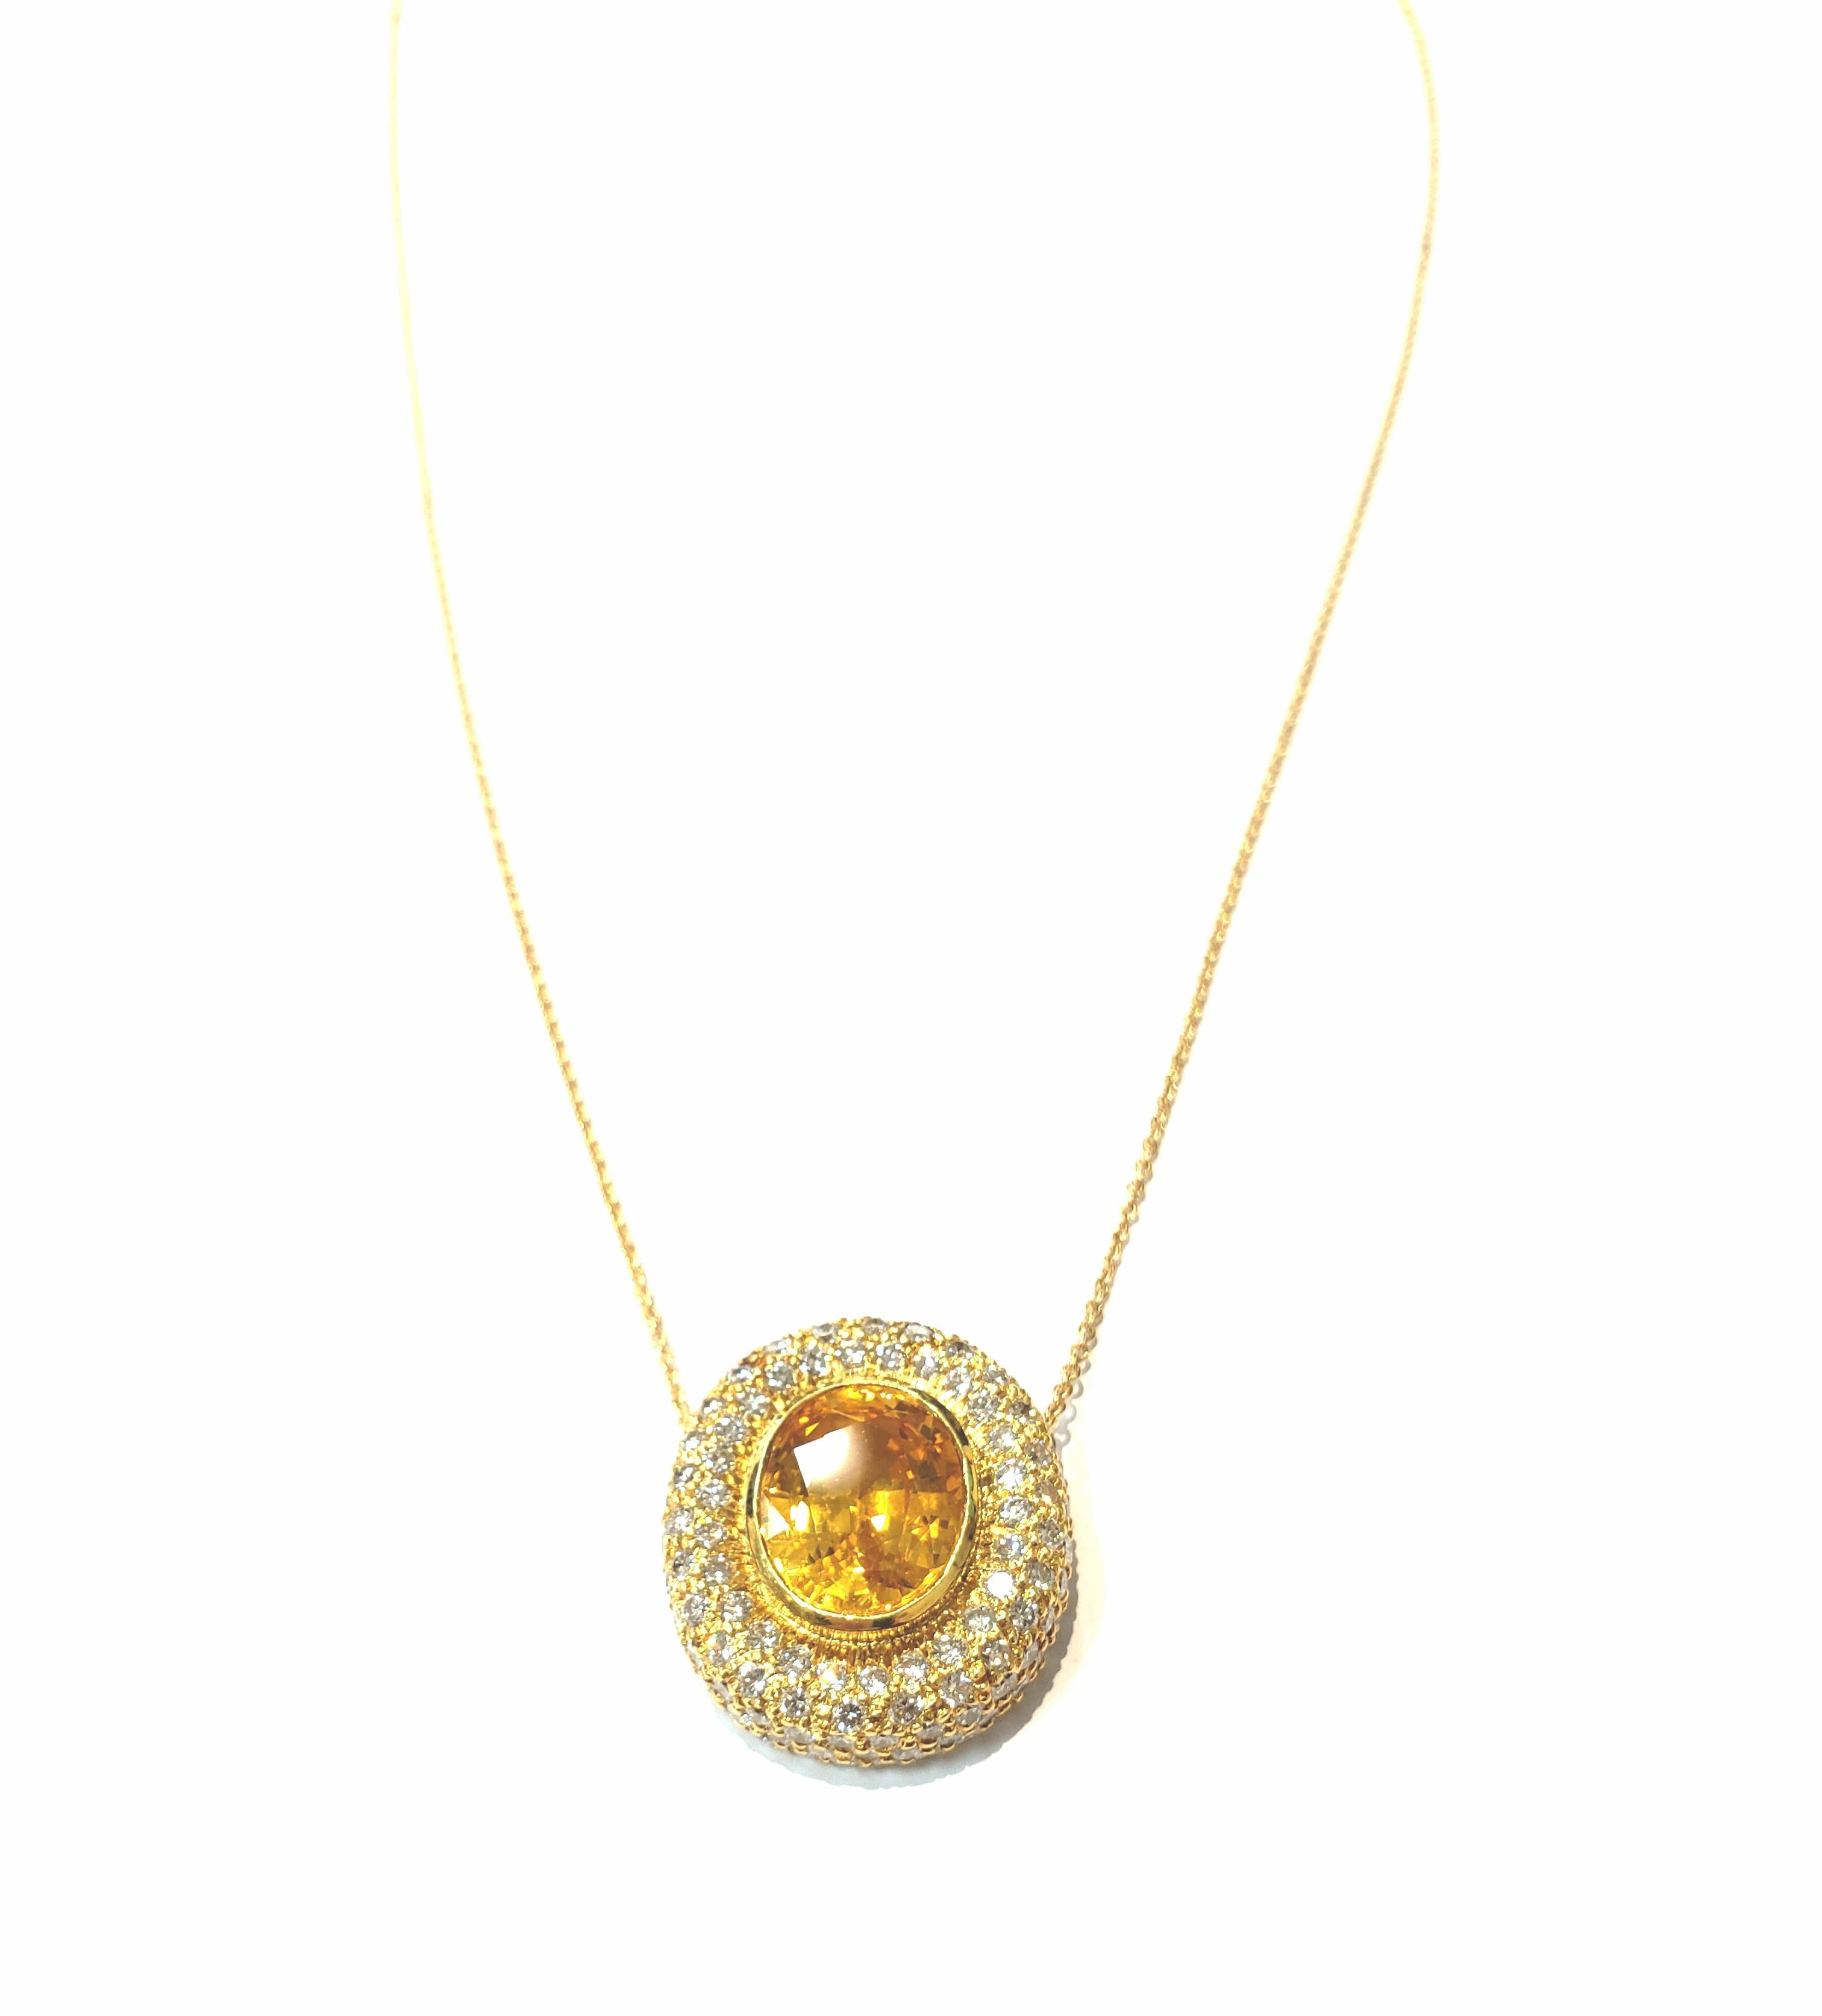 Handmade 18 Karat Yellow Gold and Diamond Pendant with a Center Yellow Sapphire For Sale 4